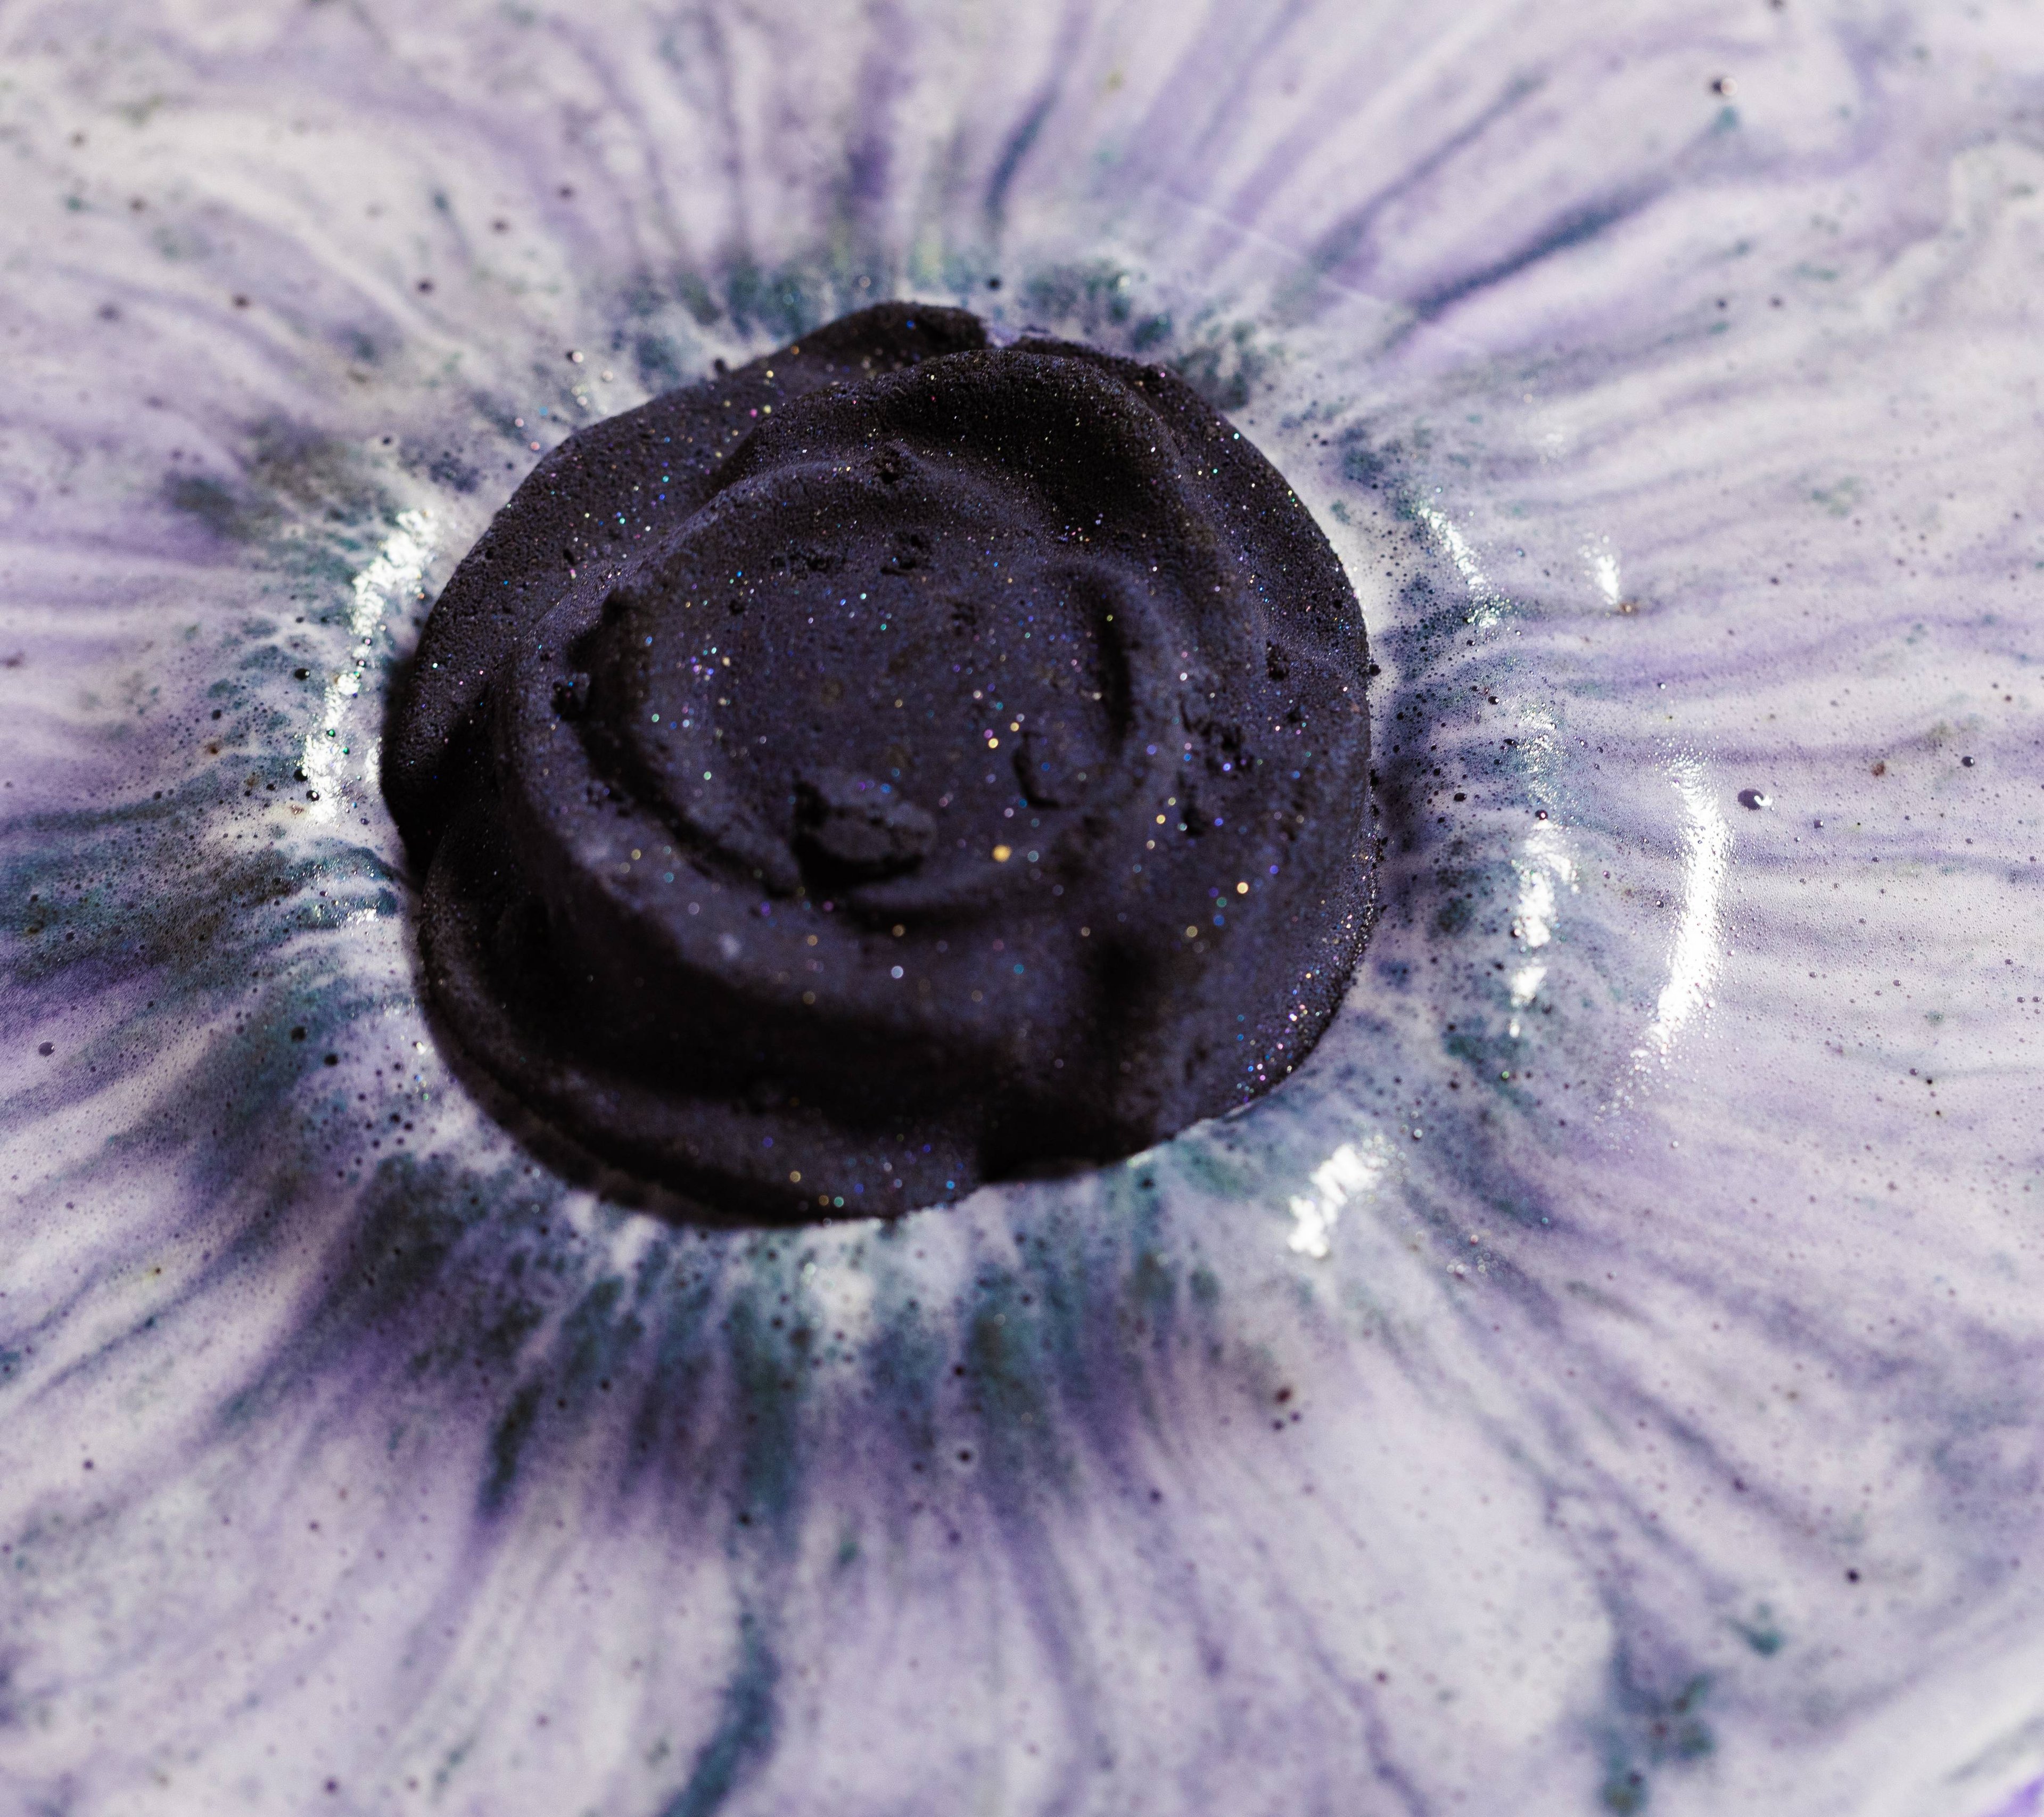 Back Rose bath bomb close-up of oozing, velvety purple and black thick foam.